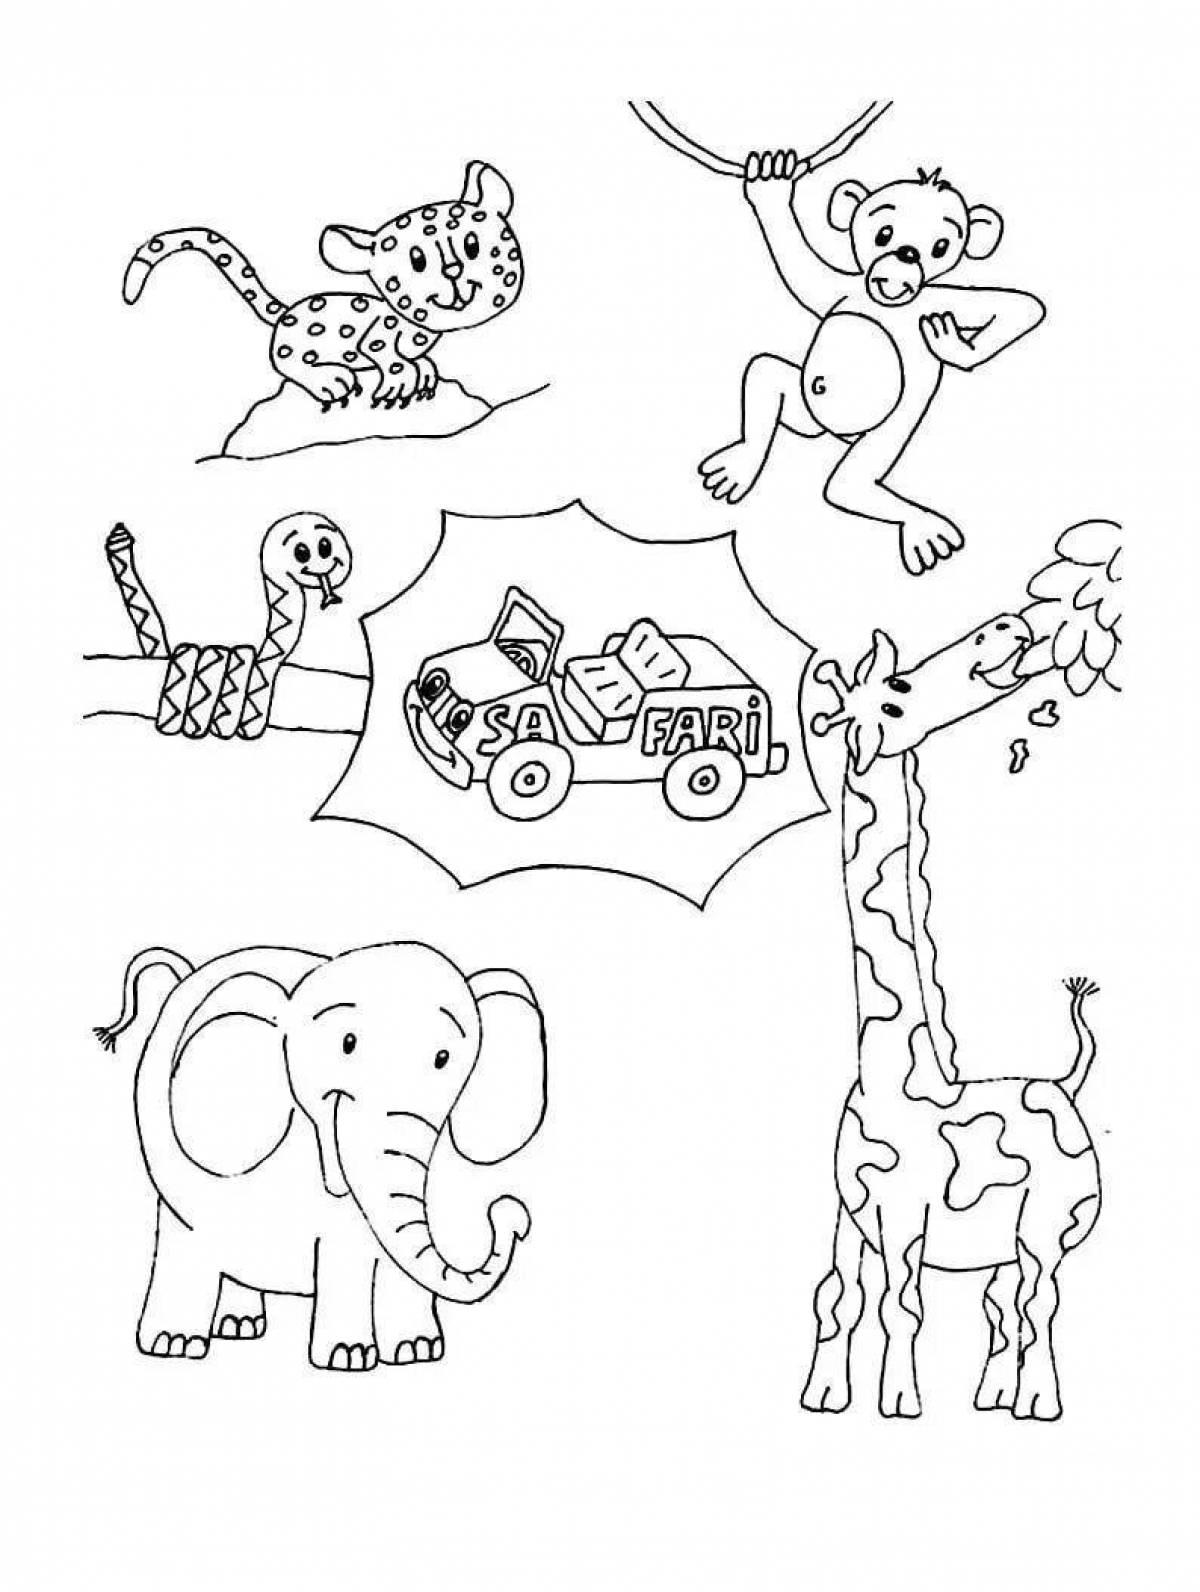 Amazing coloring pages of africa for kids